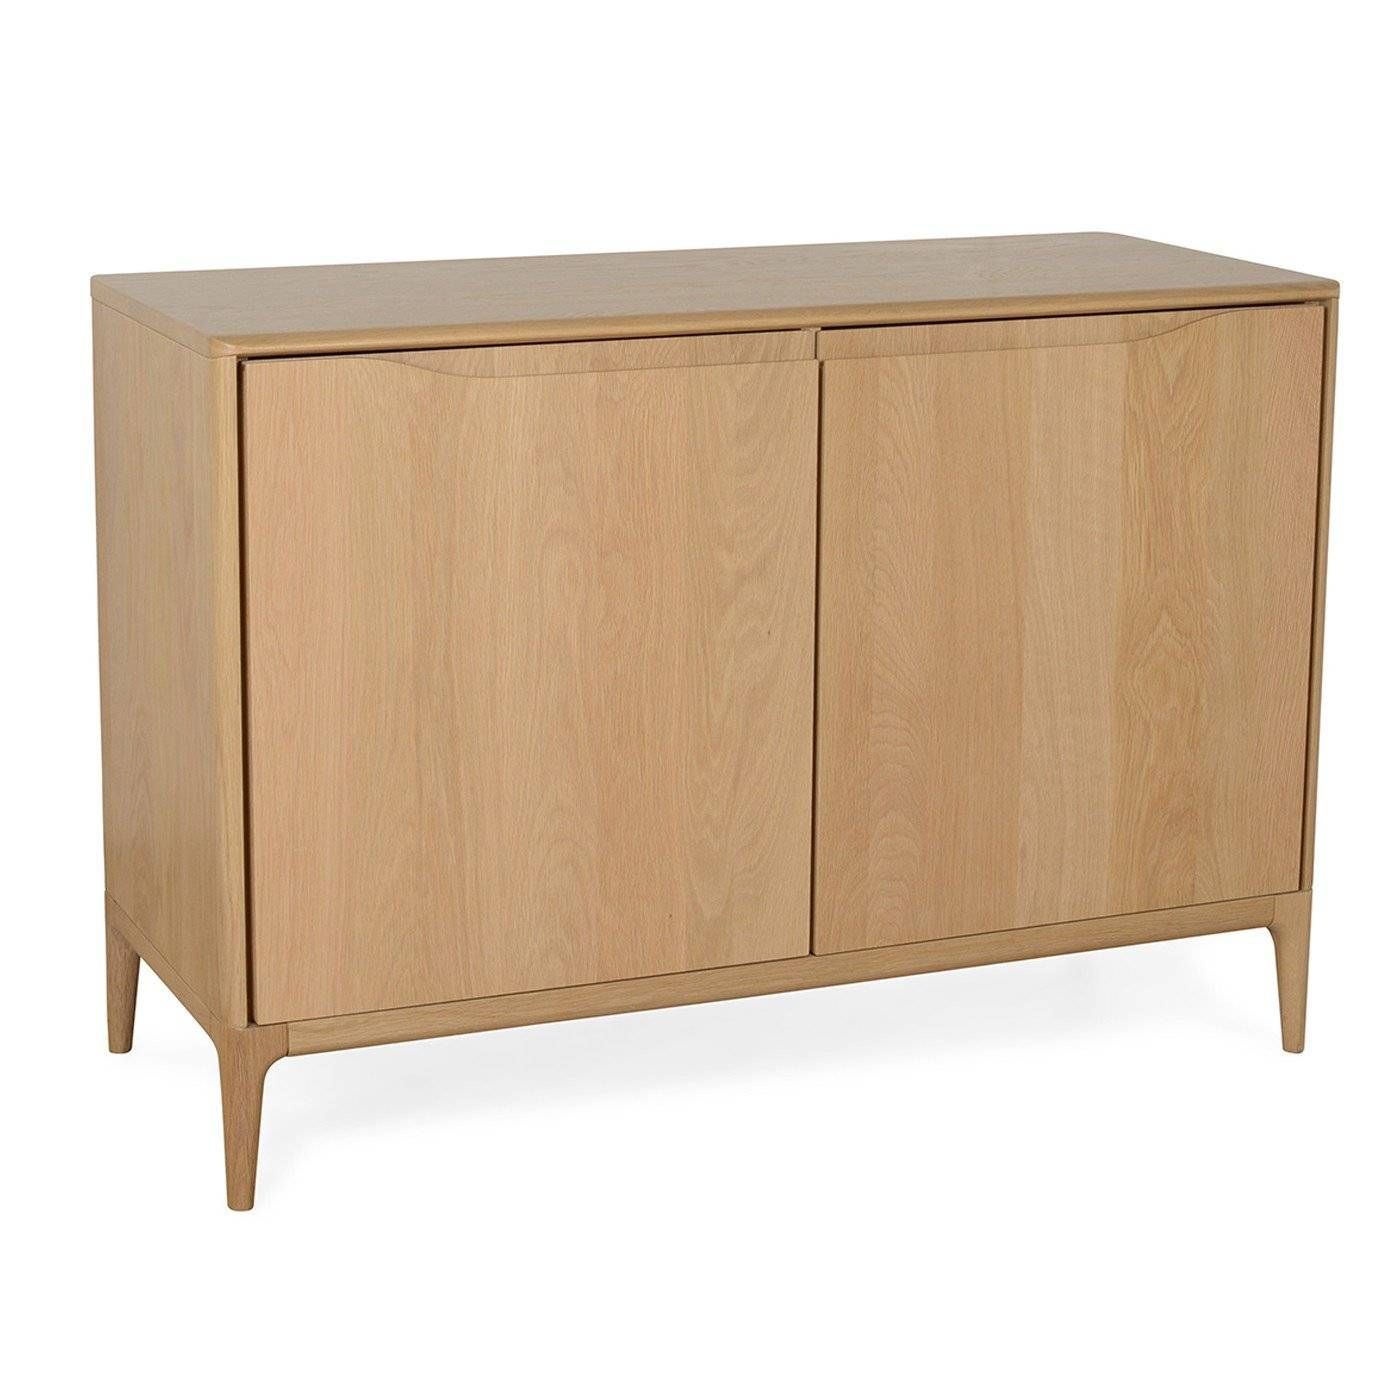 Designer Sideboards | Modern & Contemporary Sideboards | Heal's Intended For White Contemporary Sideboards (View 27 of 30)